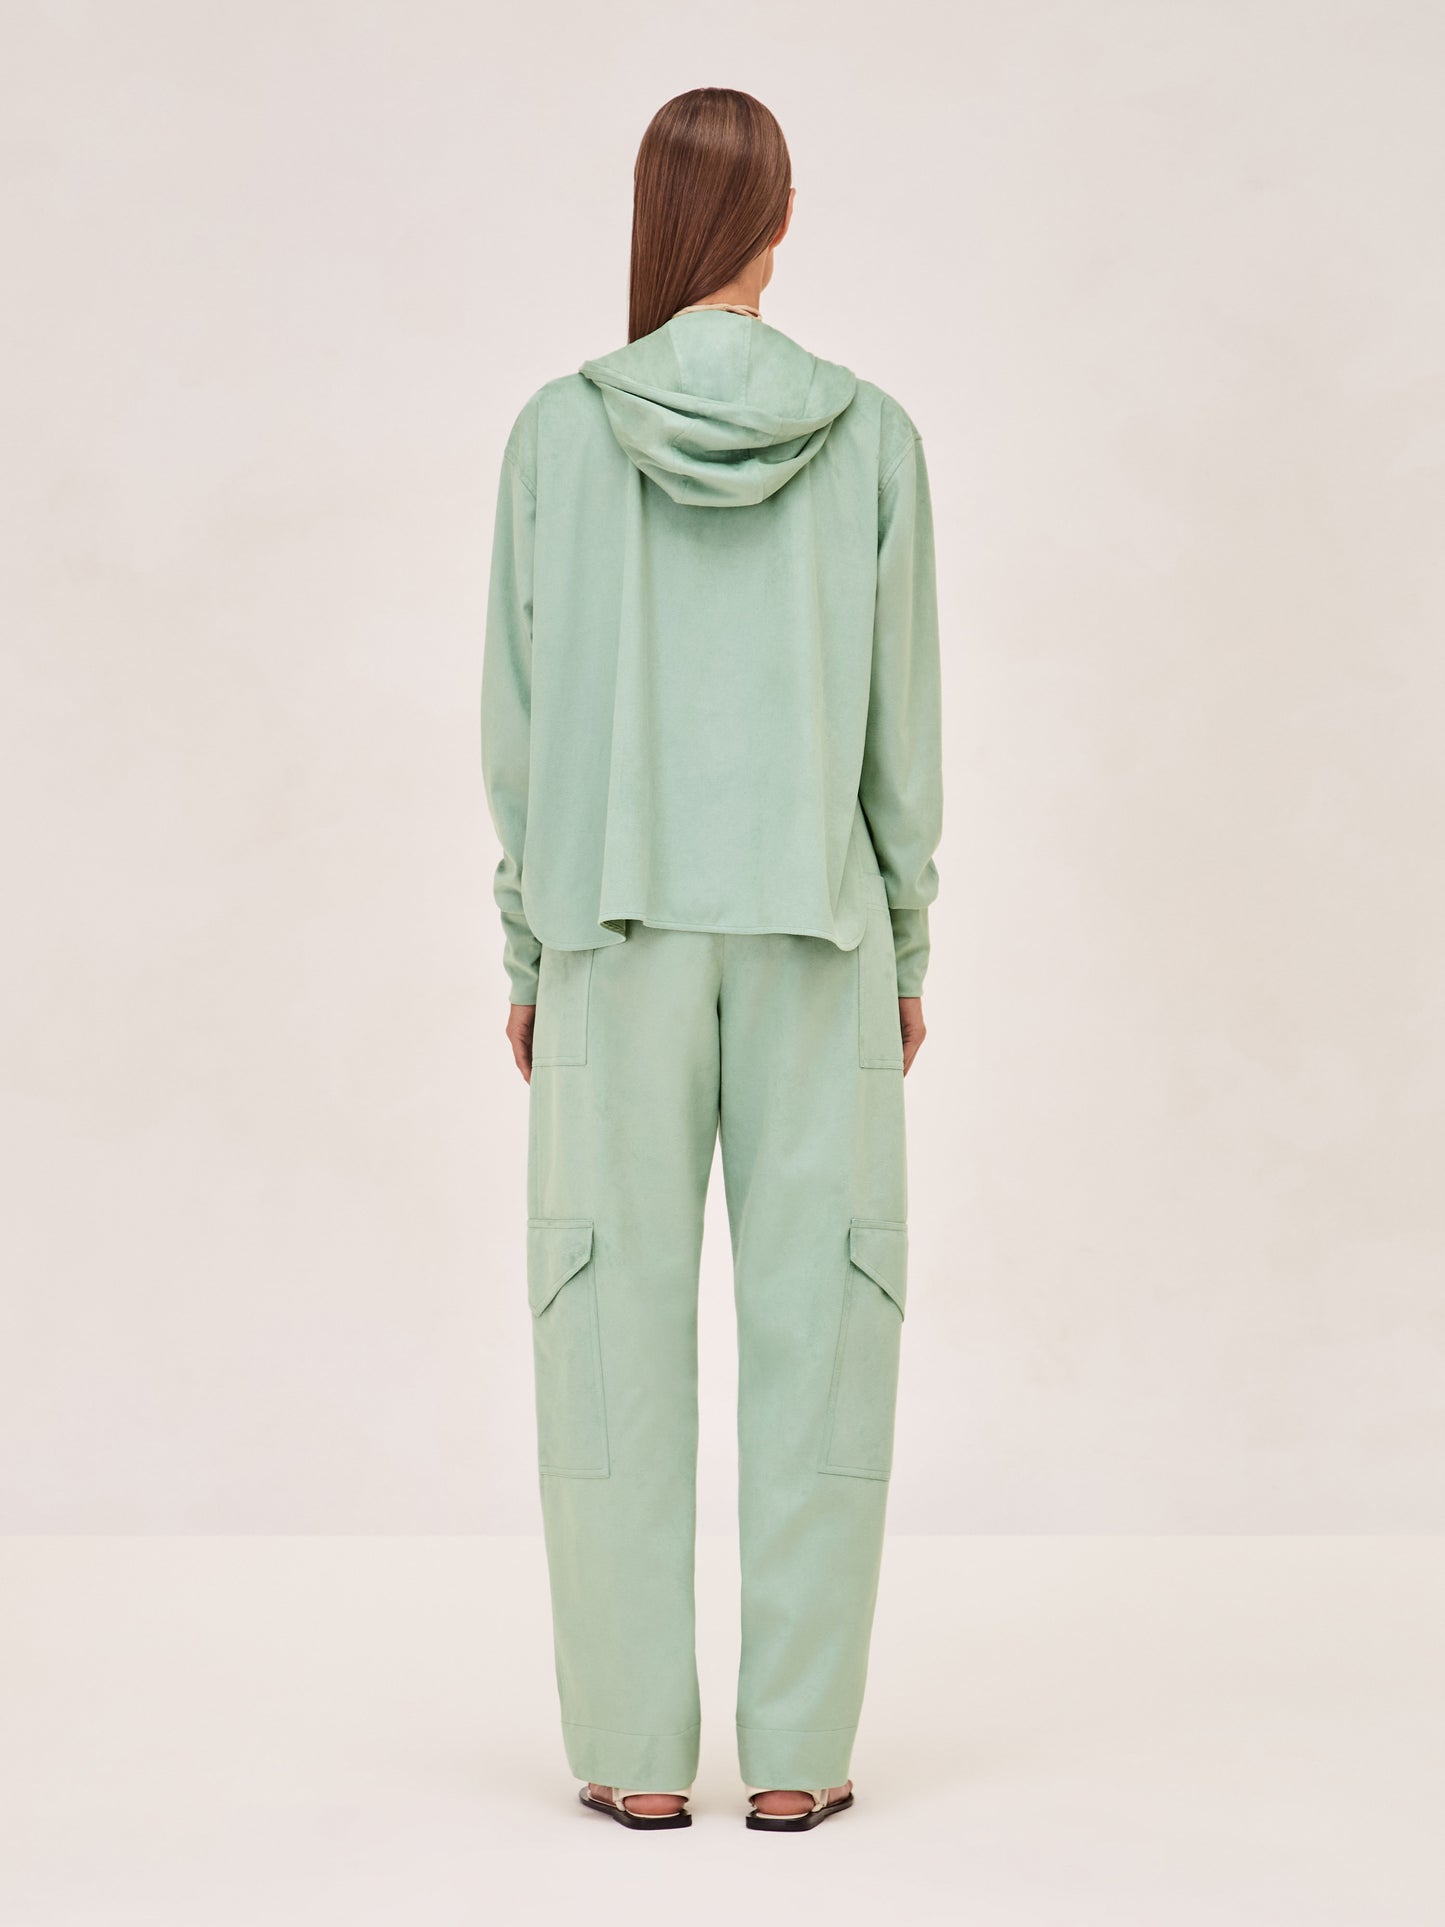 ALEXIS Suda top in sage with zipper and hood. 